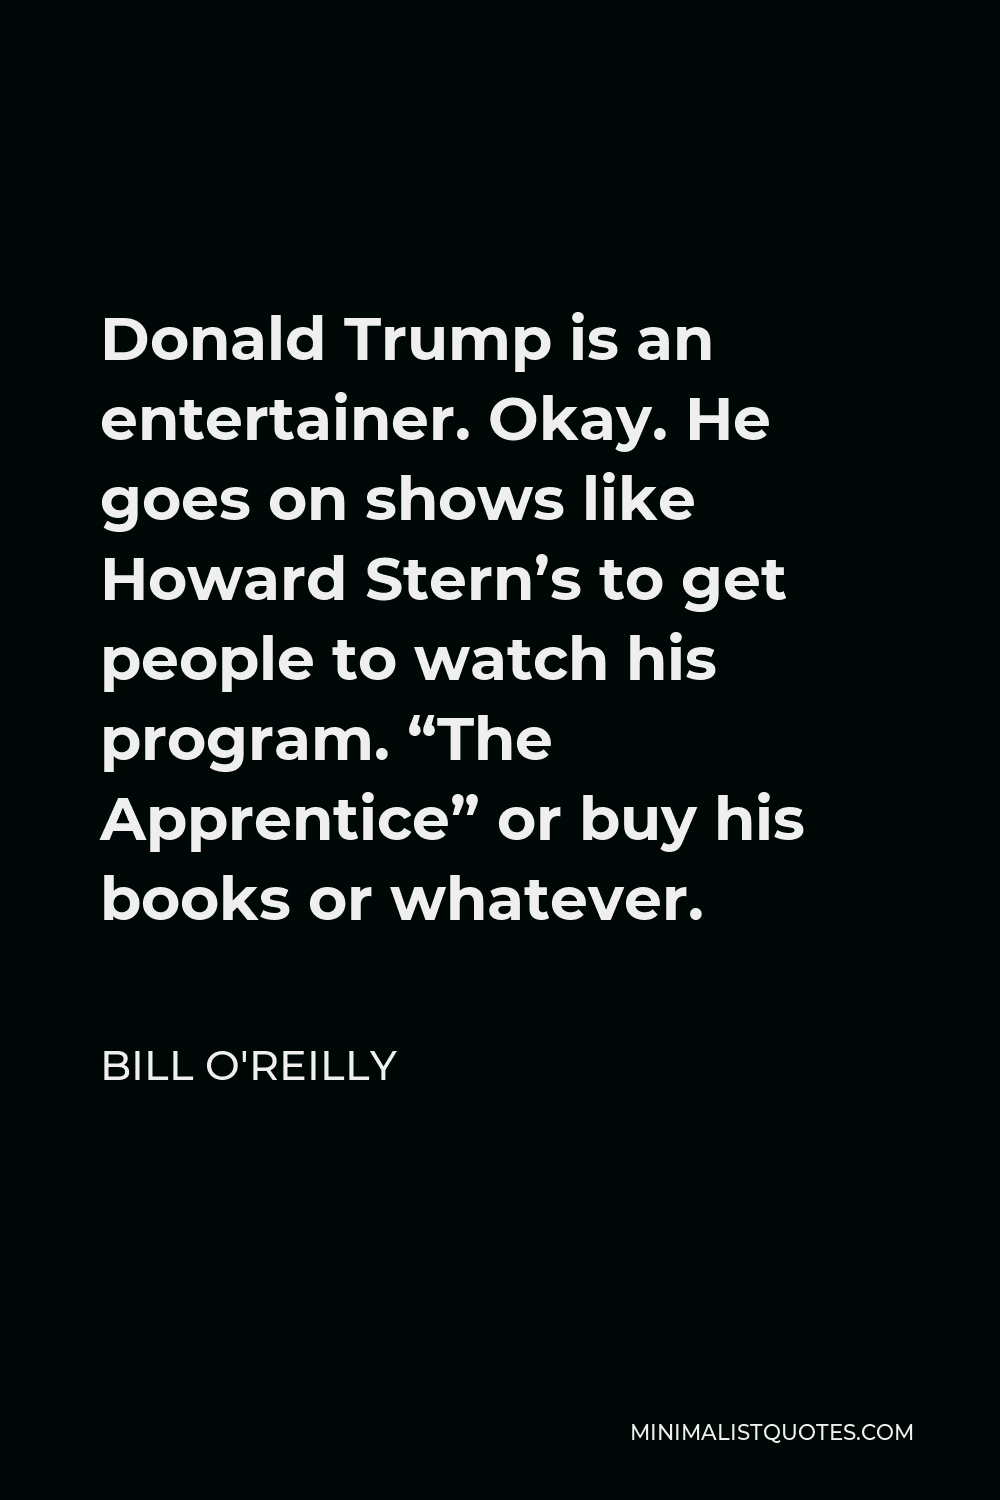 Bill O'Reilly Quote - Donald Trump is an entertainer. Okay. He goes on shows like Howard Stern’s to get people to watch his program. “The Apprentice” or buy his books or whatever.